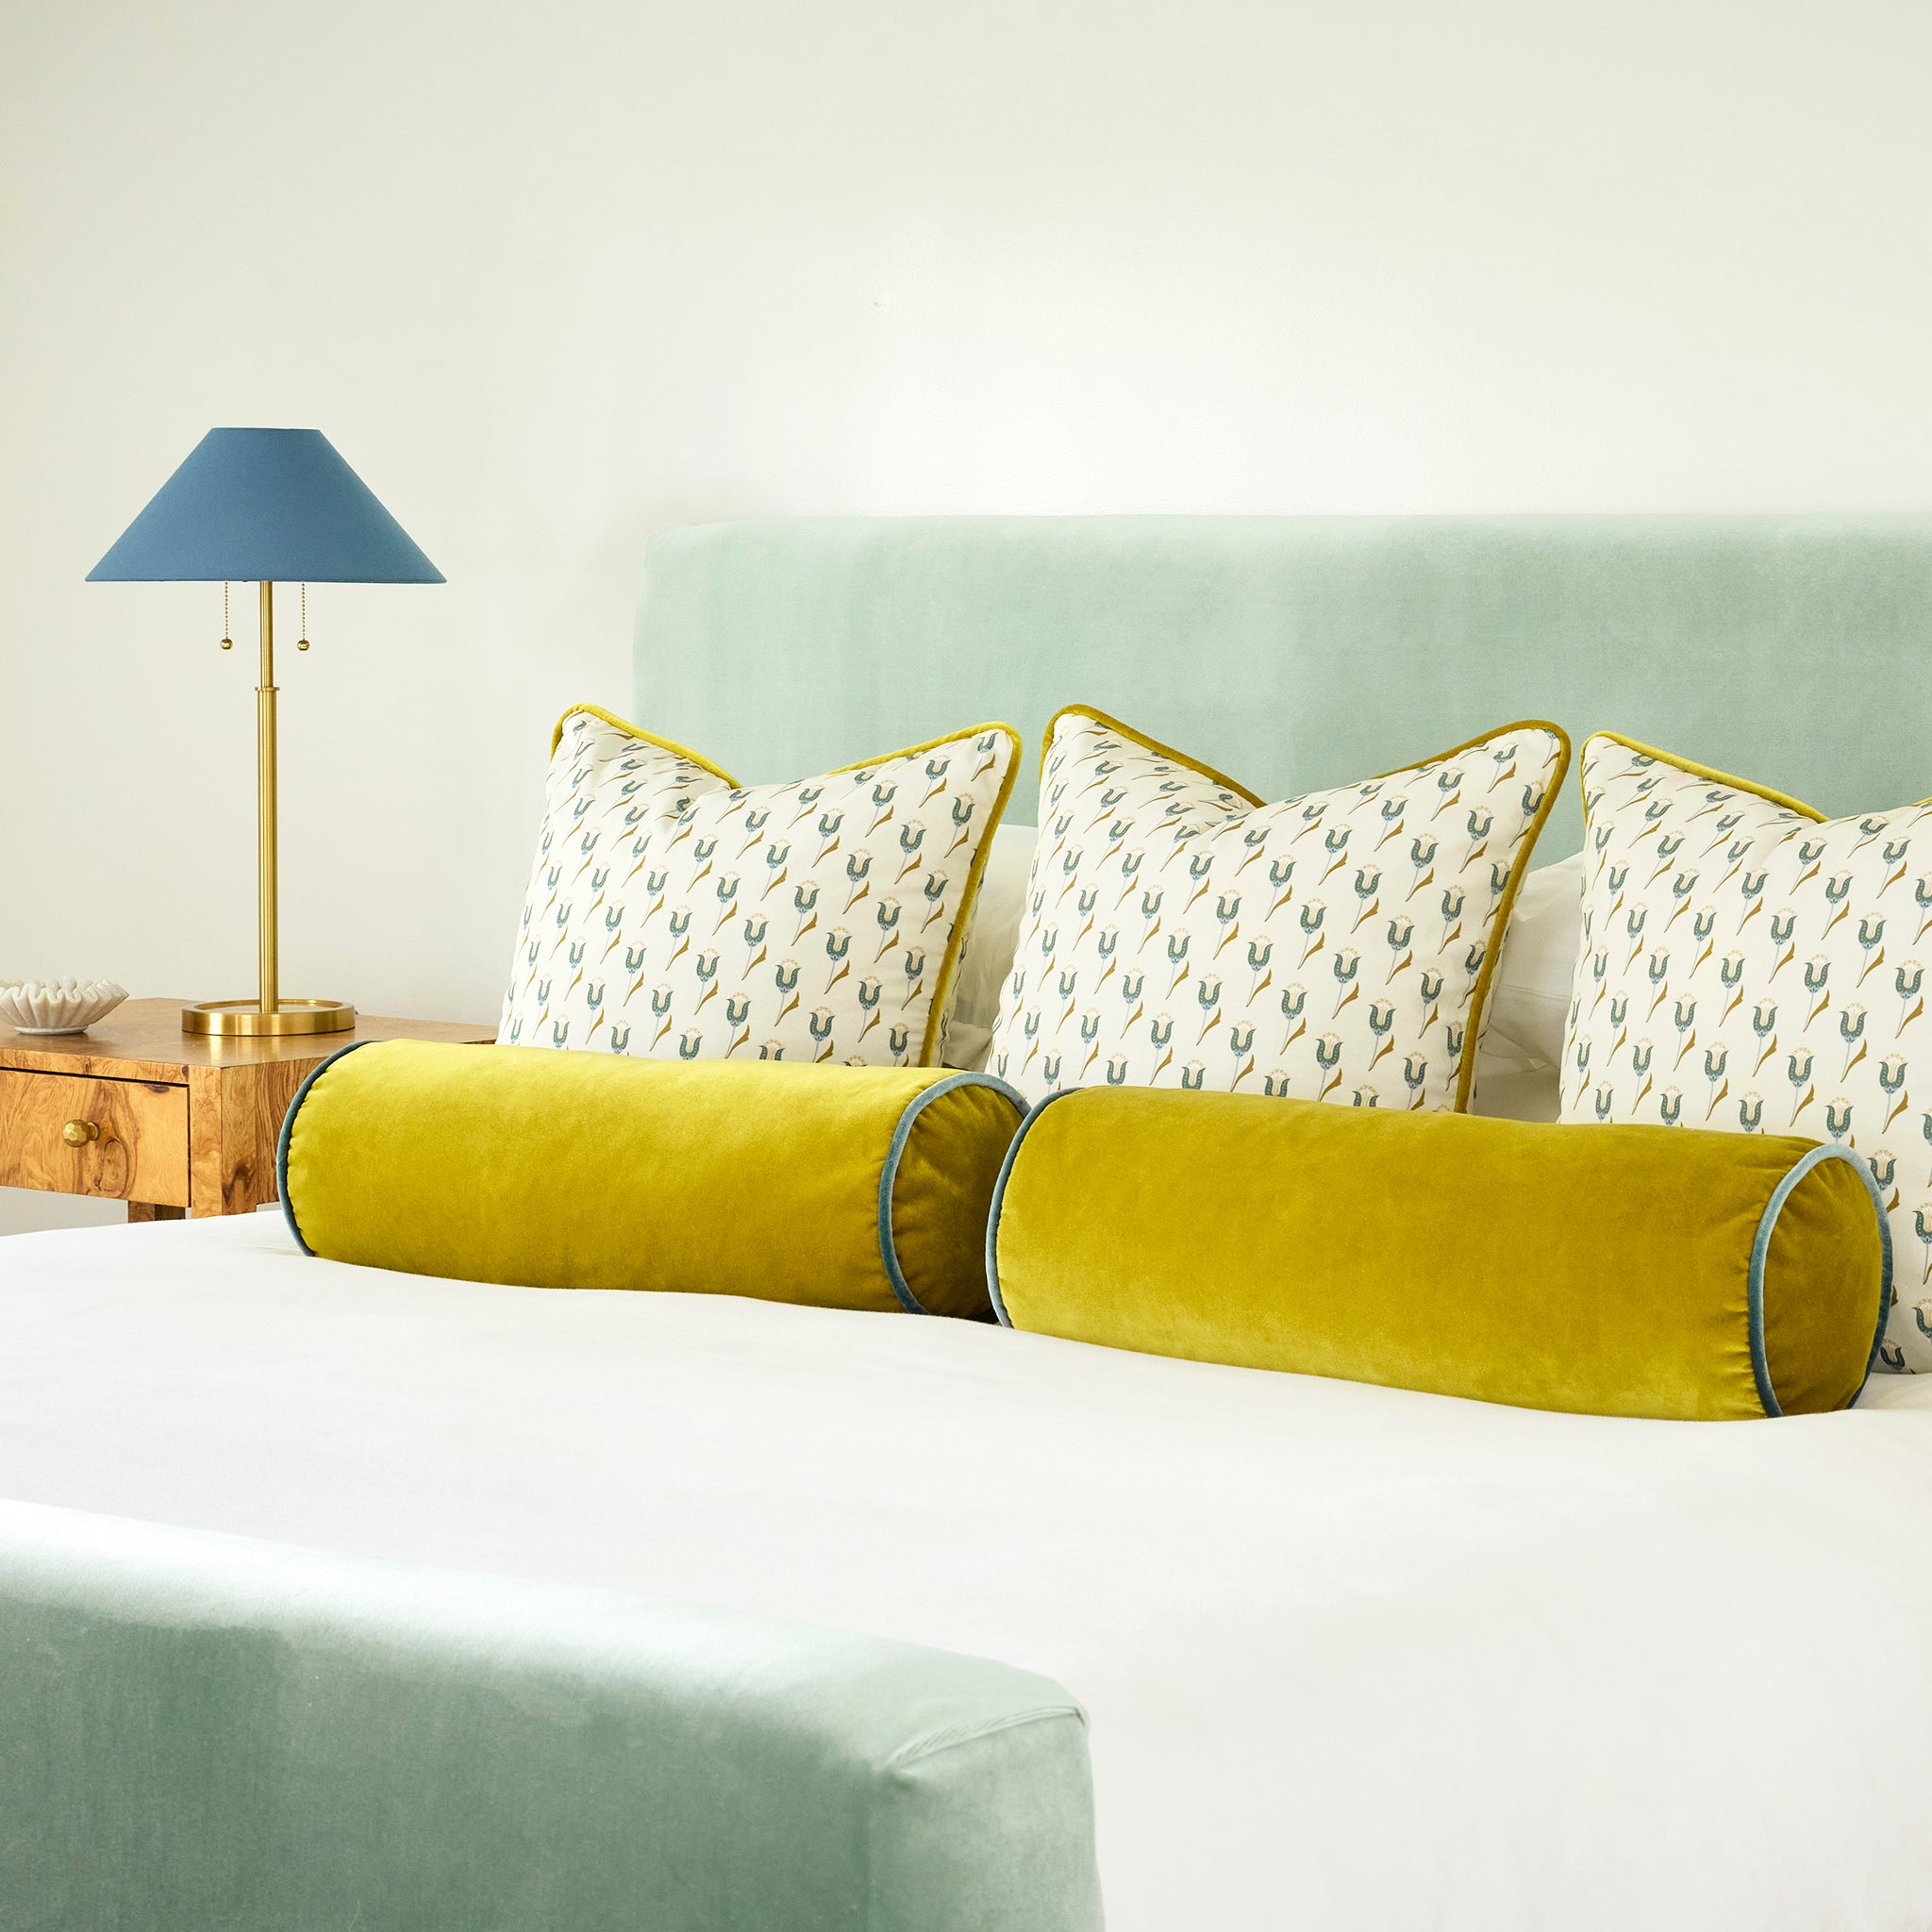 Light blue green bed frame with white bedding, abstract floral green pillows, and and gold yellow bolster pillows on the bed, a wooden night stand next to the bed with a golden lamp with a blue lampshade on the table